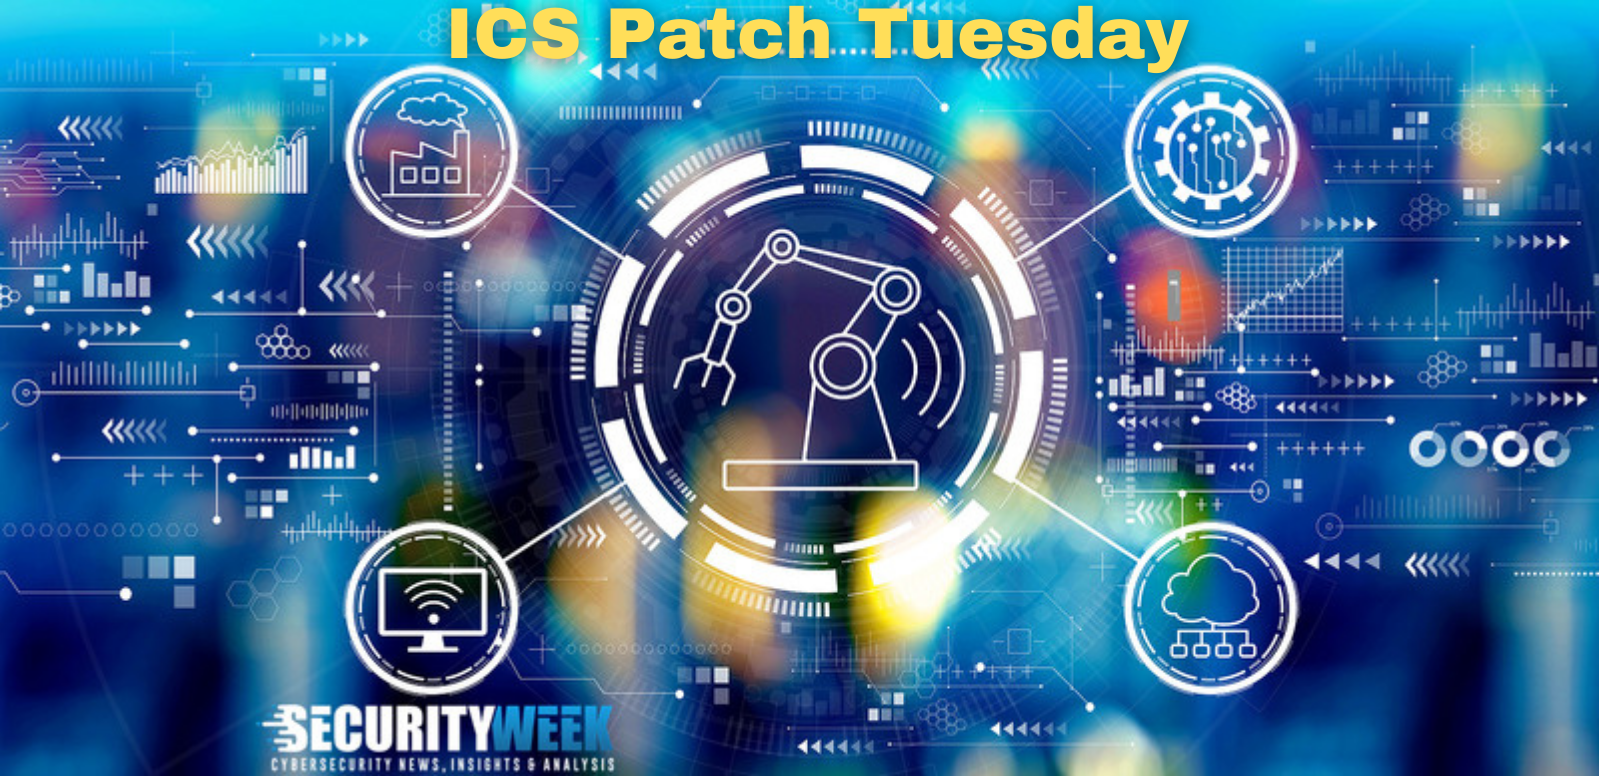 ics-patch-tuesday:-siemens-fixes-7-vulnerabilities-in-ruggedcom-products